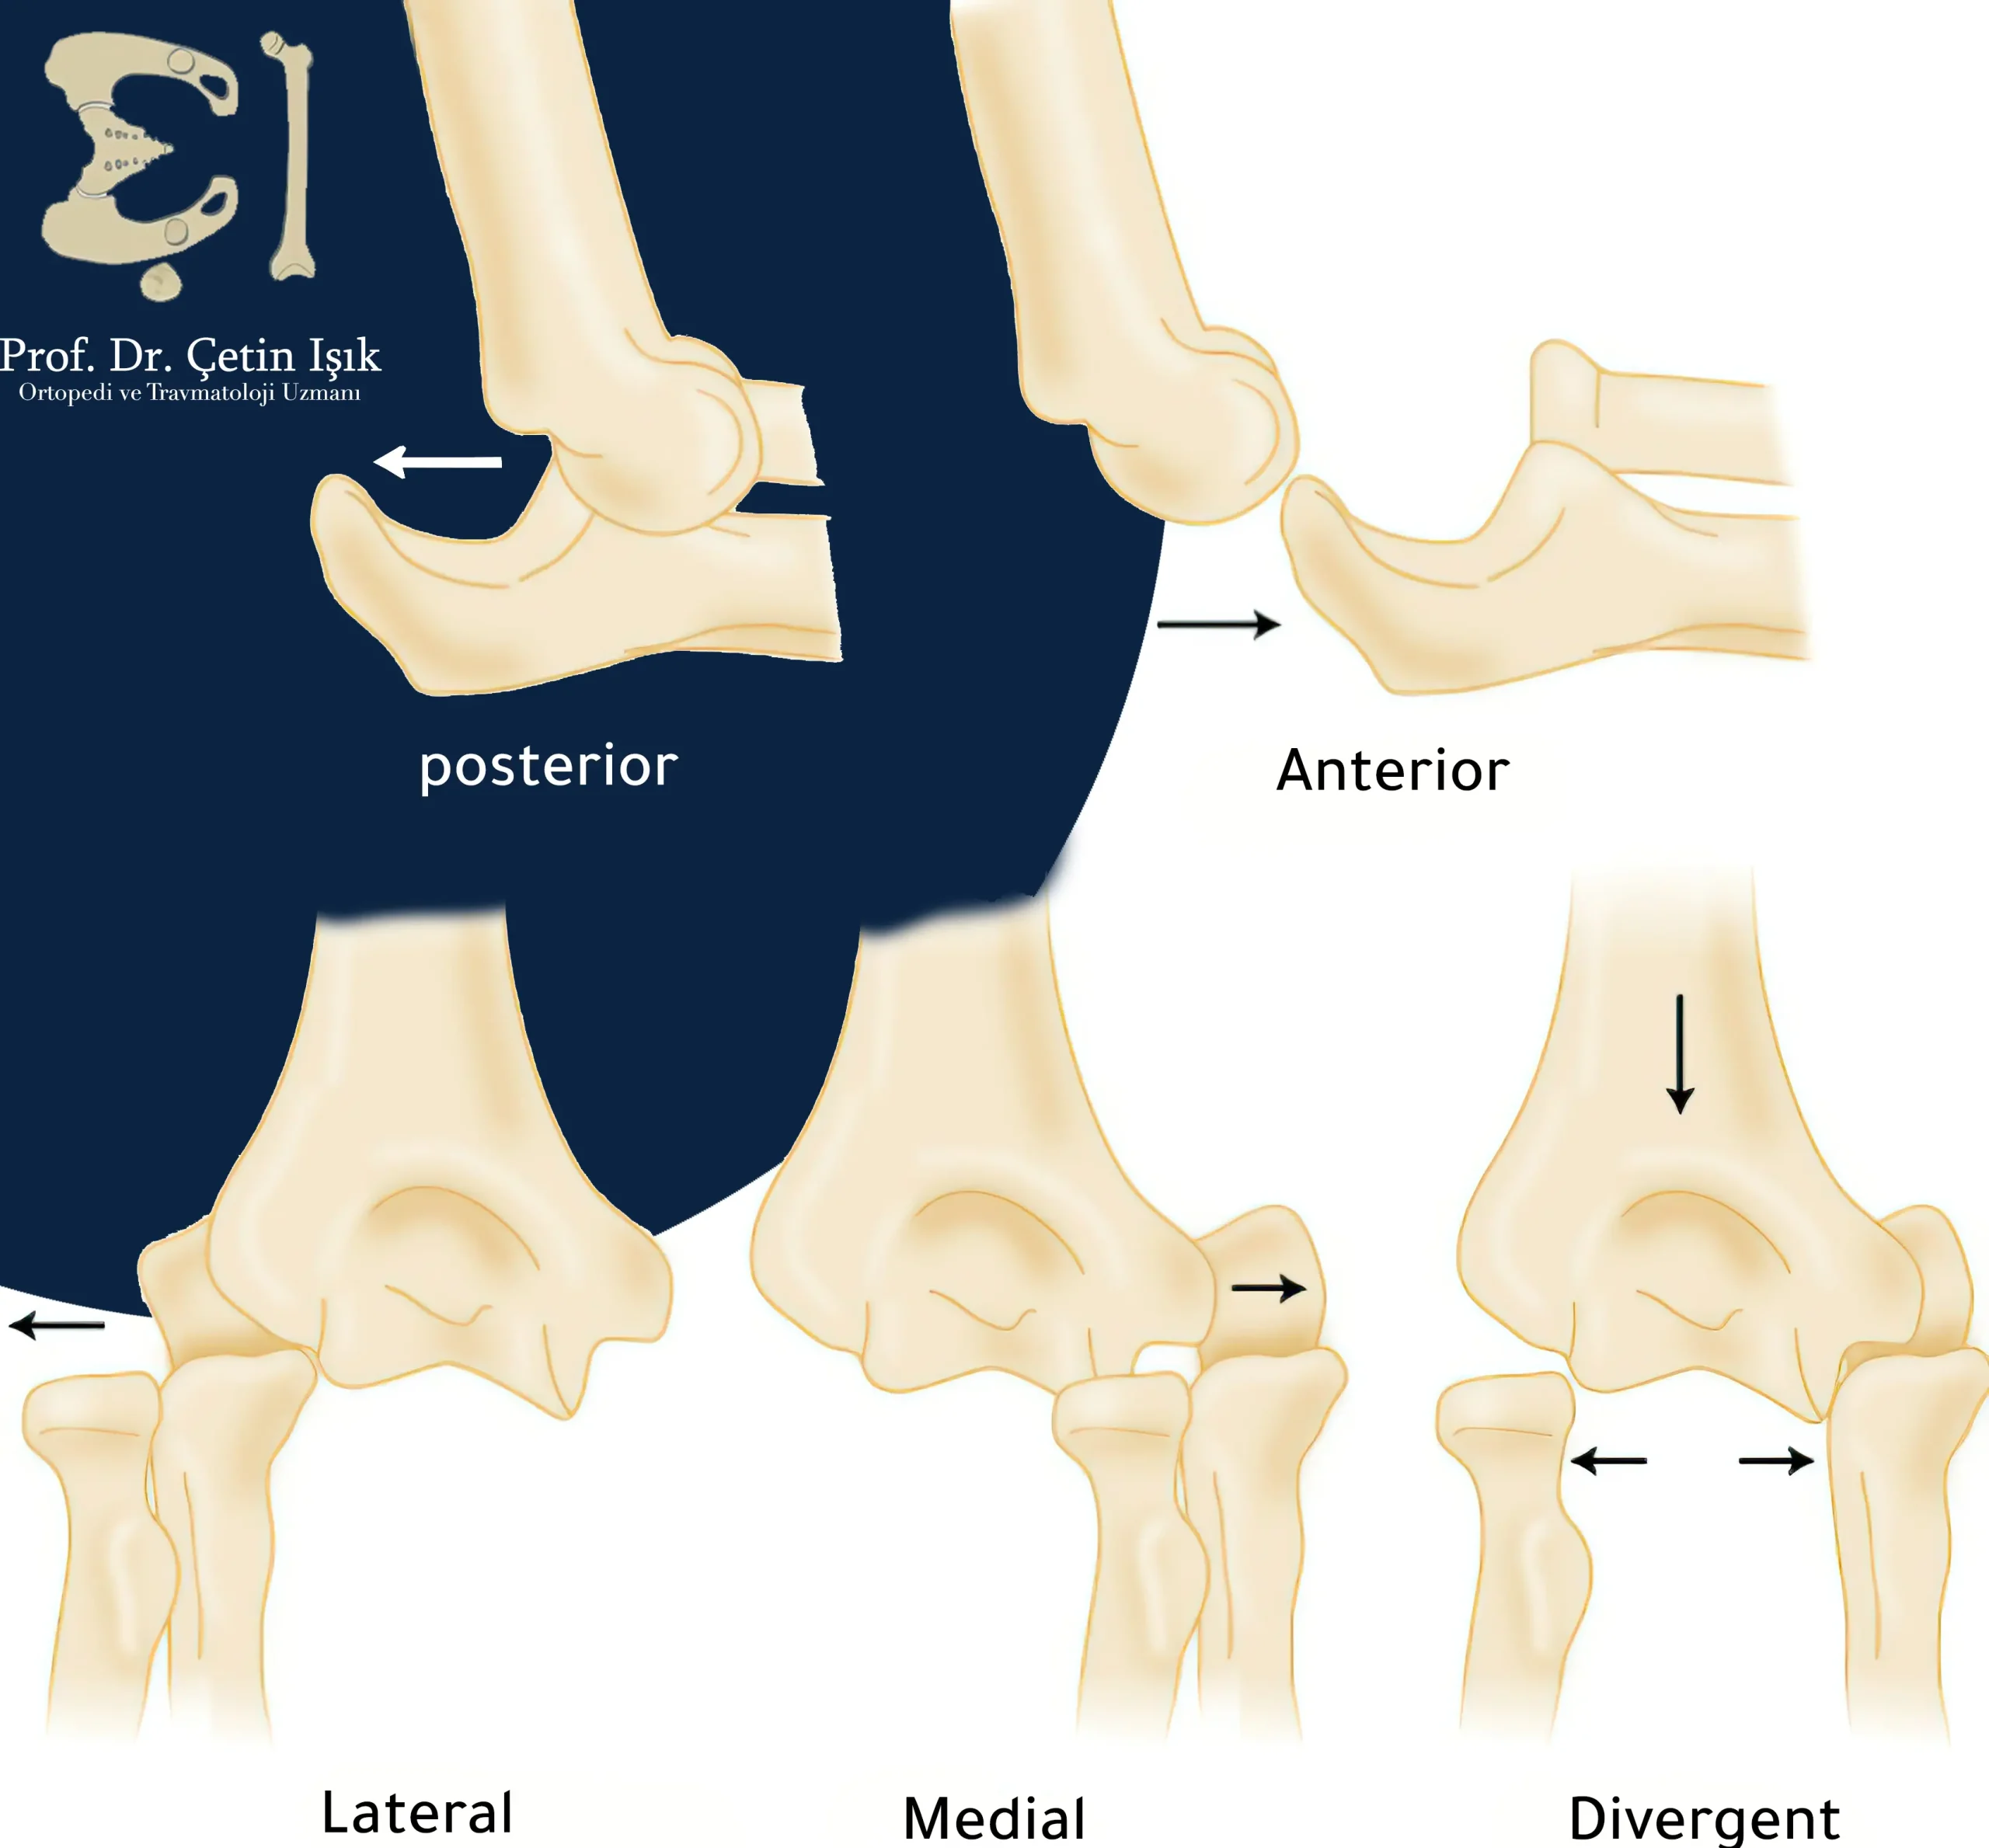 An image showing the different types of dislocation of the elbow joint, depending on the location of the dislocation